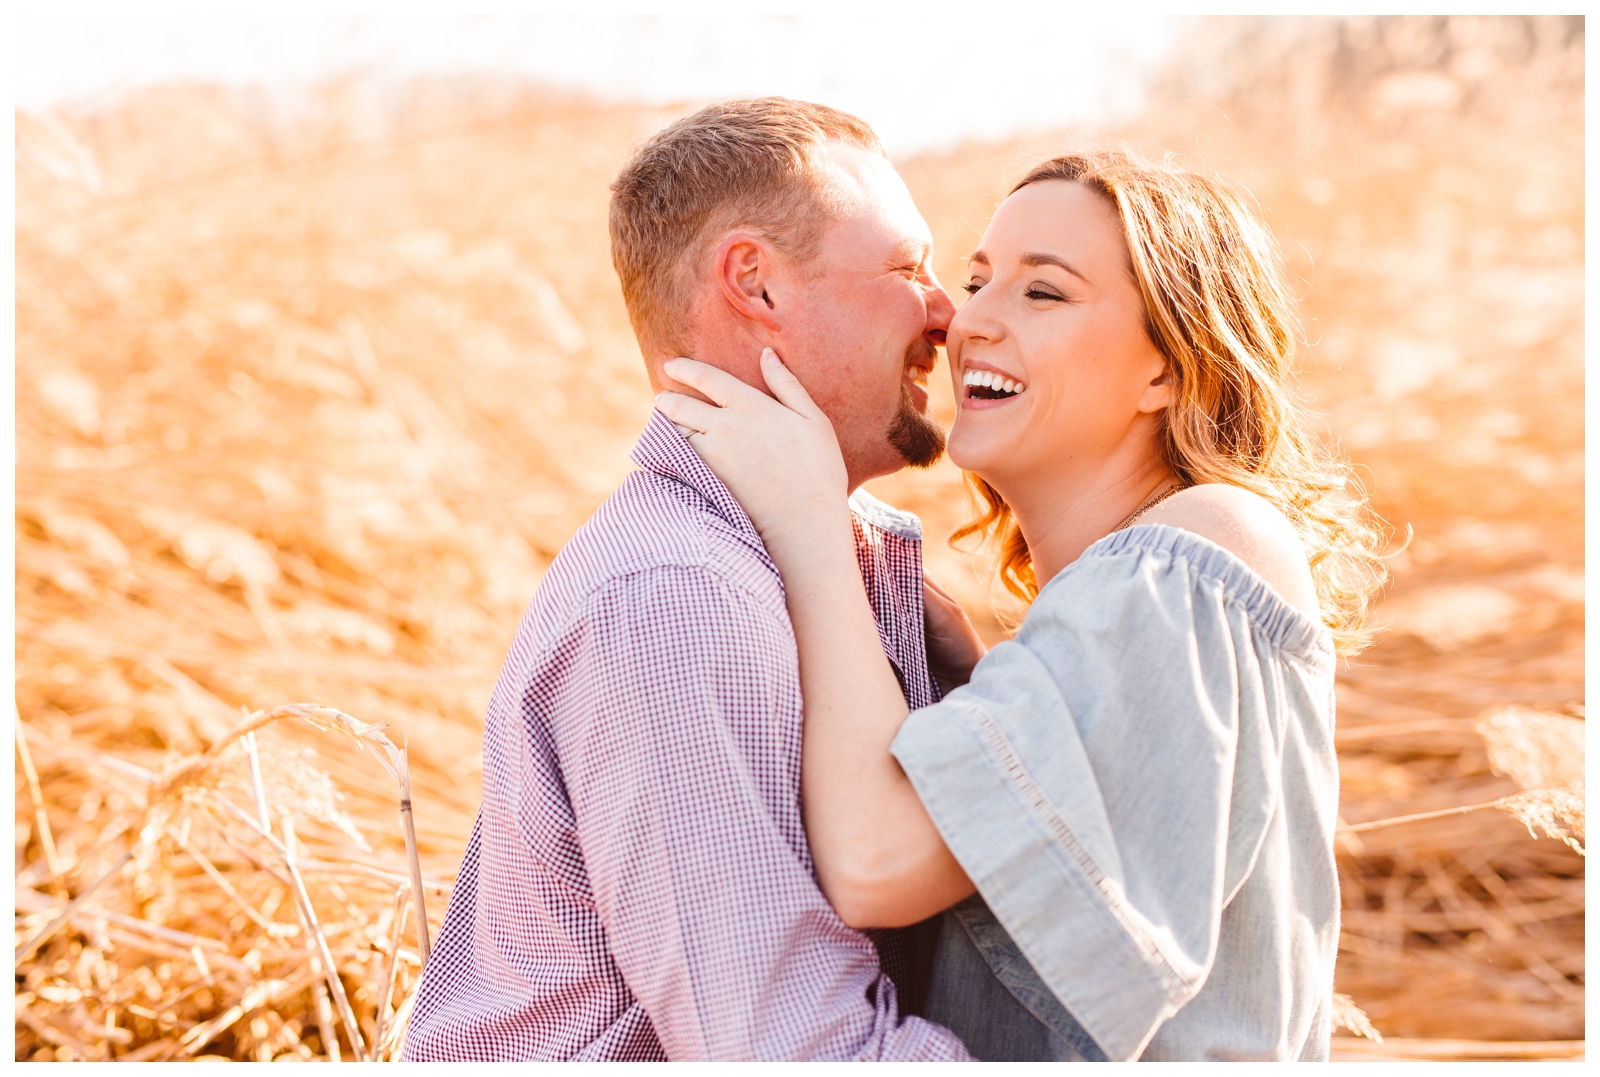 Family Farm Engagement Session Inspiration - Maryland - Brooke Michelle Photography